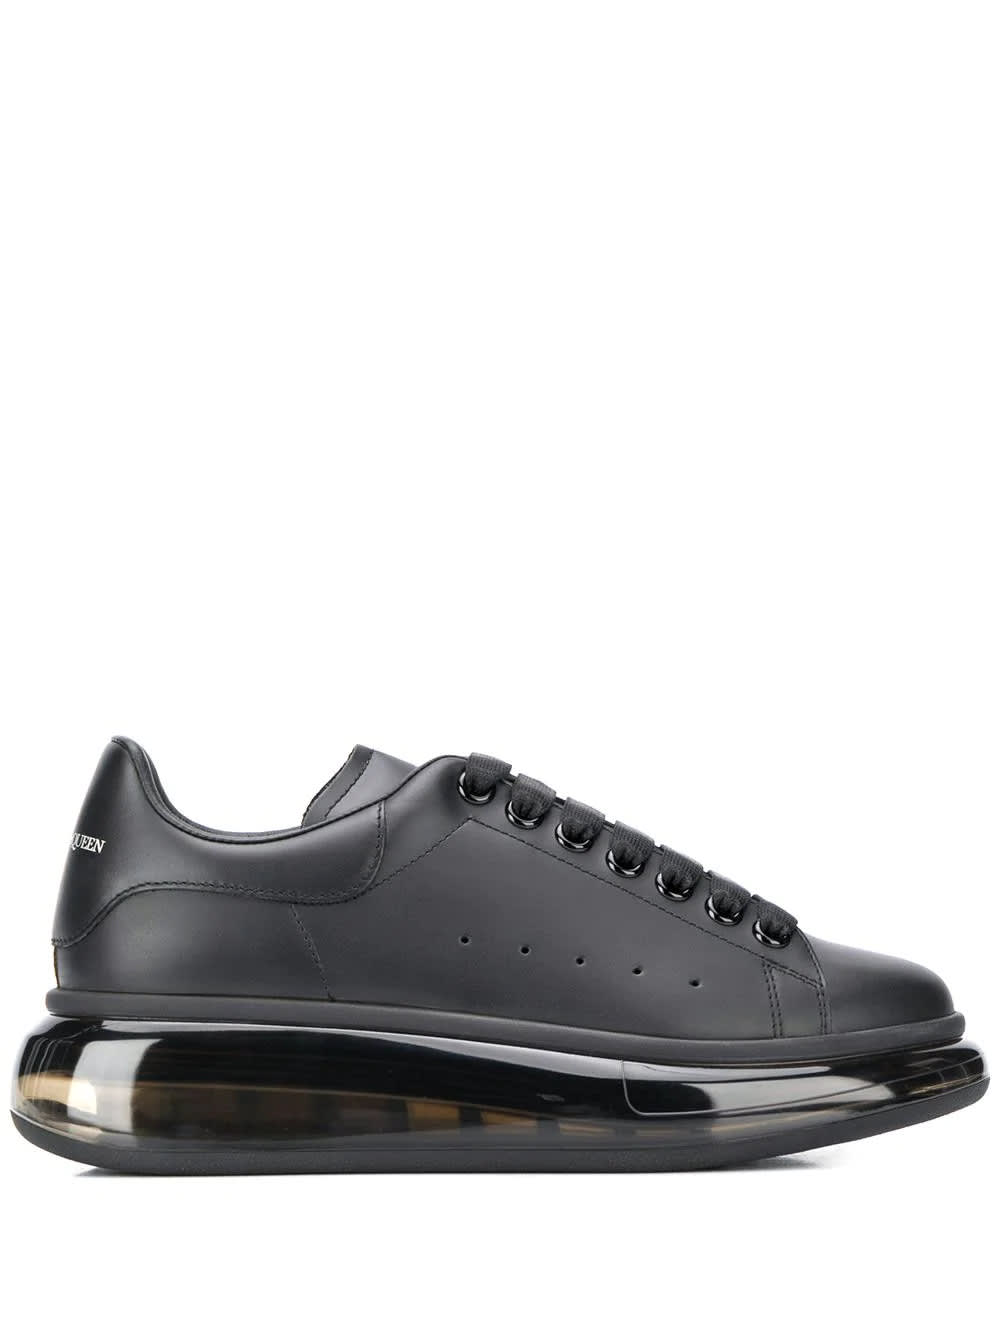 Buy Alexander McQueen Woman Black Oversize Sneakers With Transparent Sole online, shop Alexander McQueen shoes with free shipping